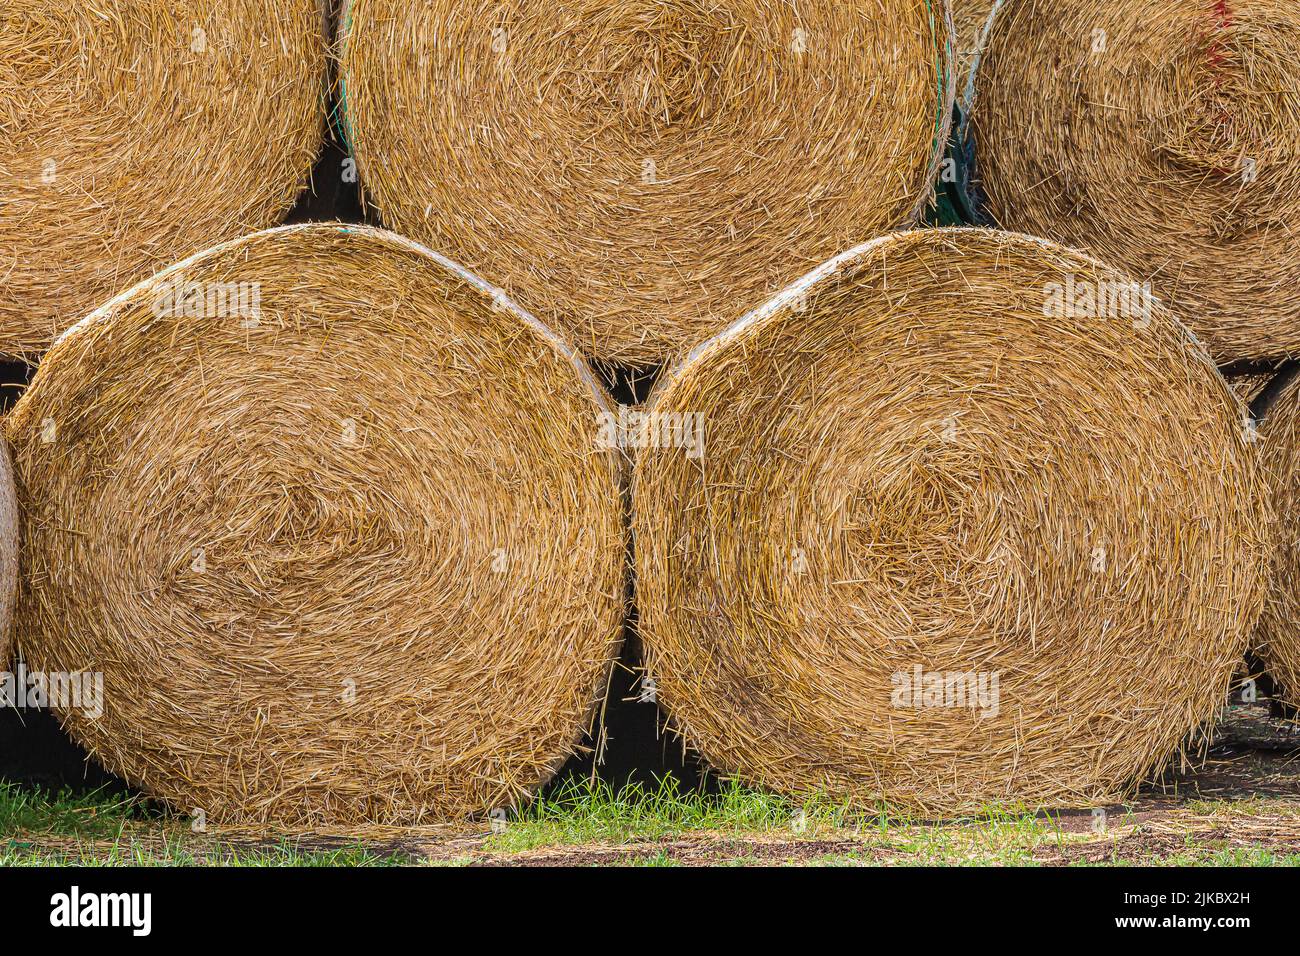 Details Bales of hay at the edge of the field after harvest. Bales of straw next to each other. and hay pressed into straw bales. Structures of dry go Stock Photo